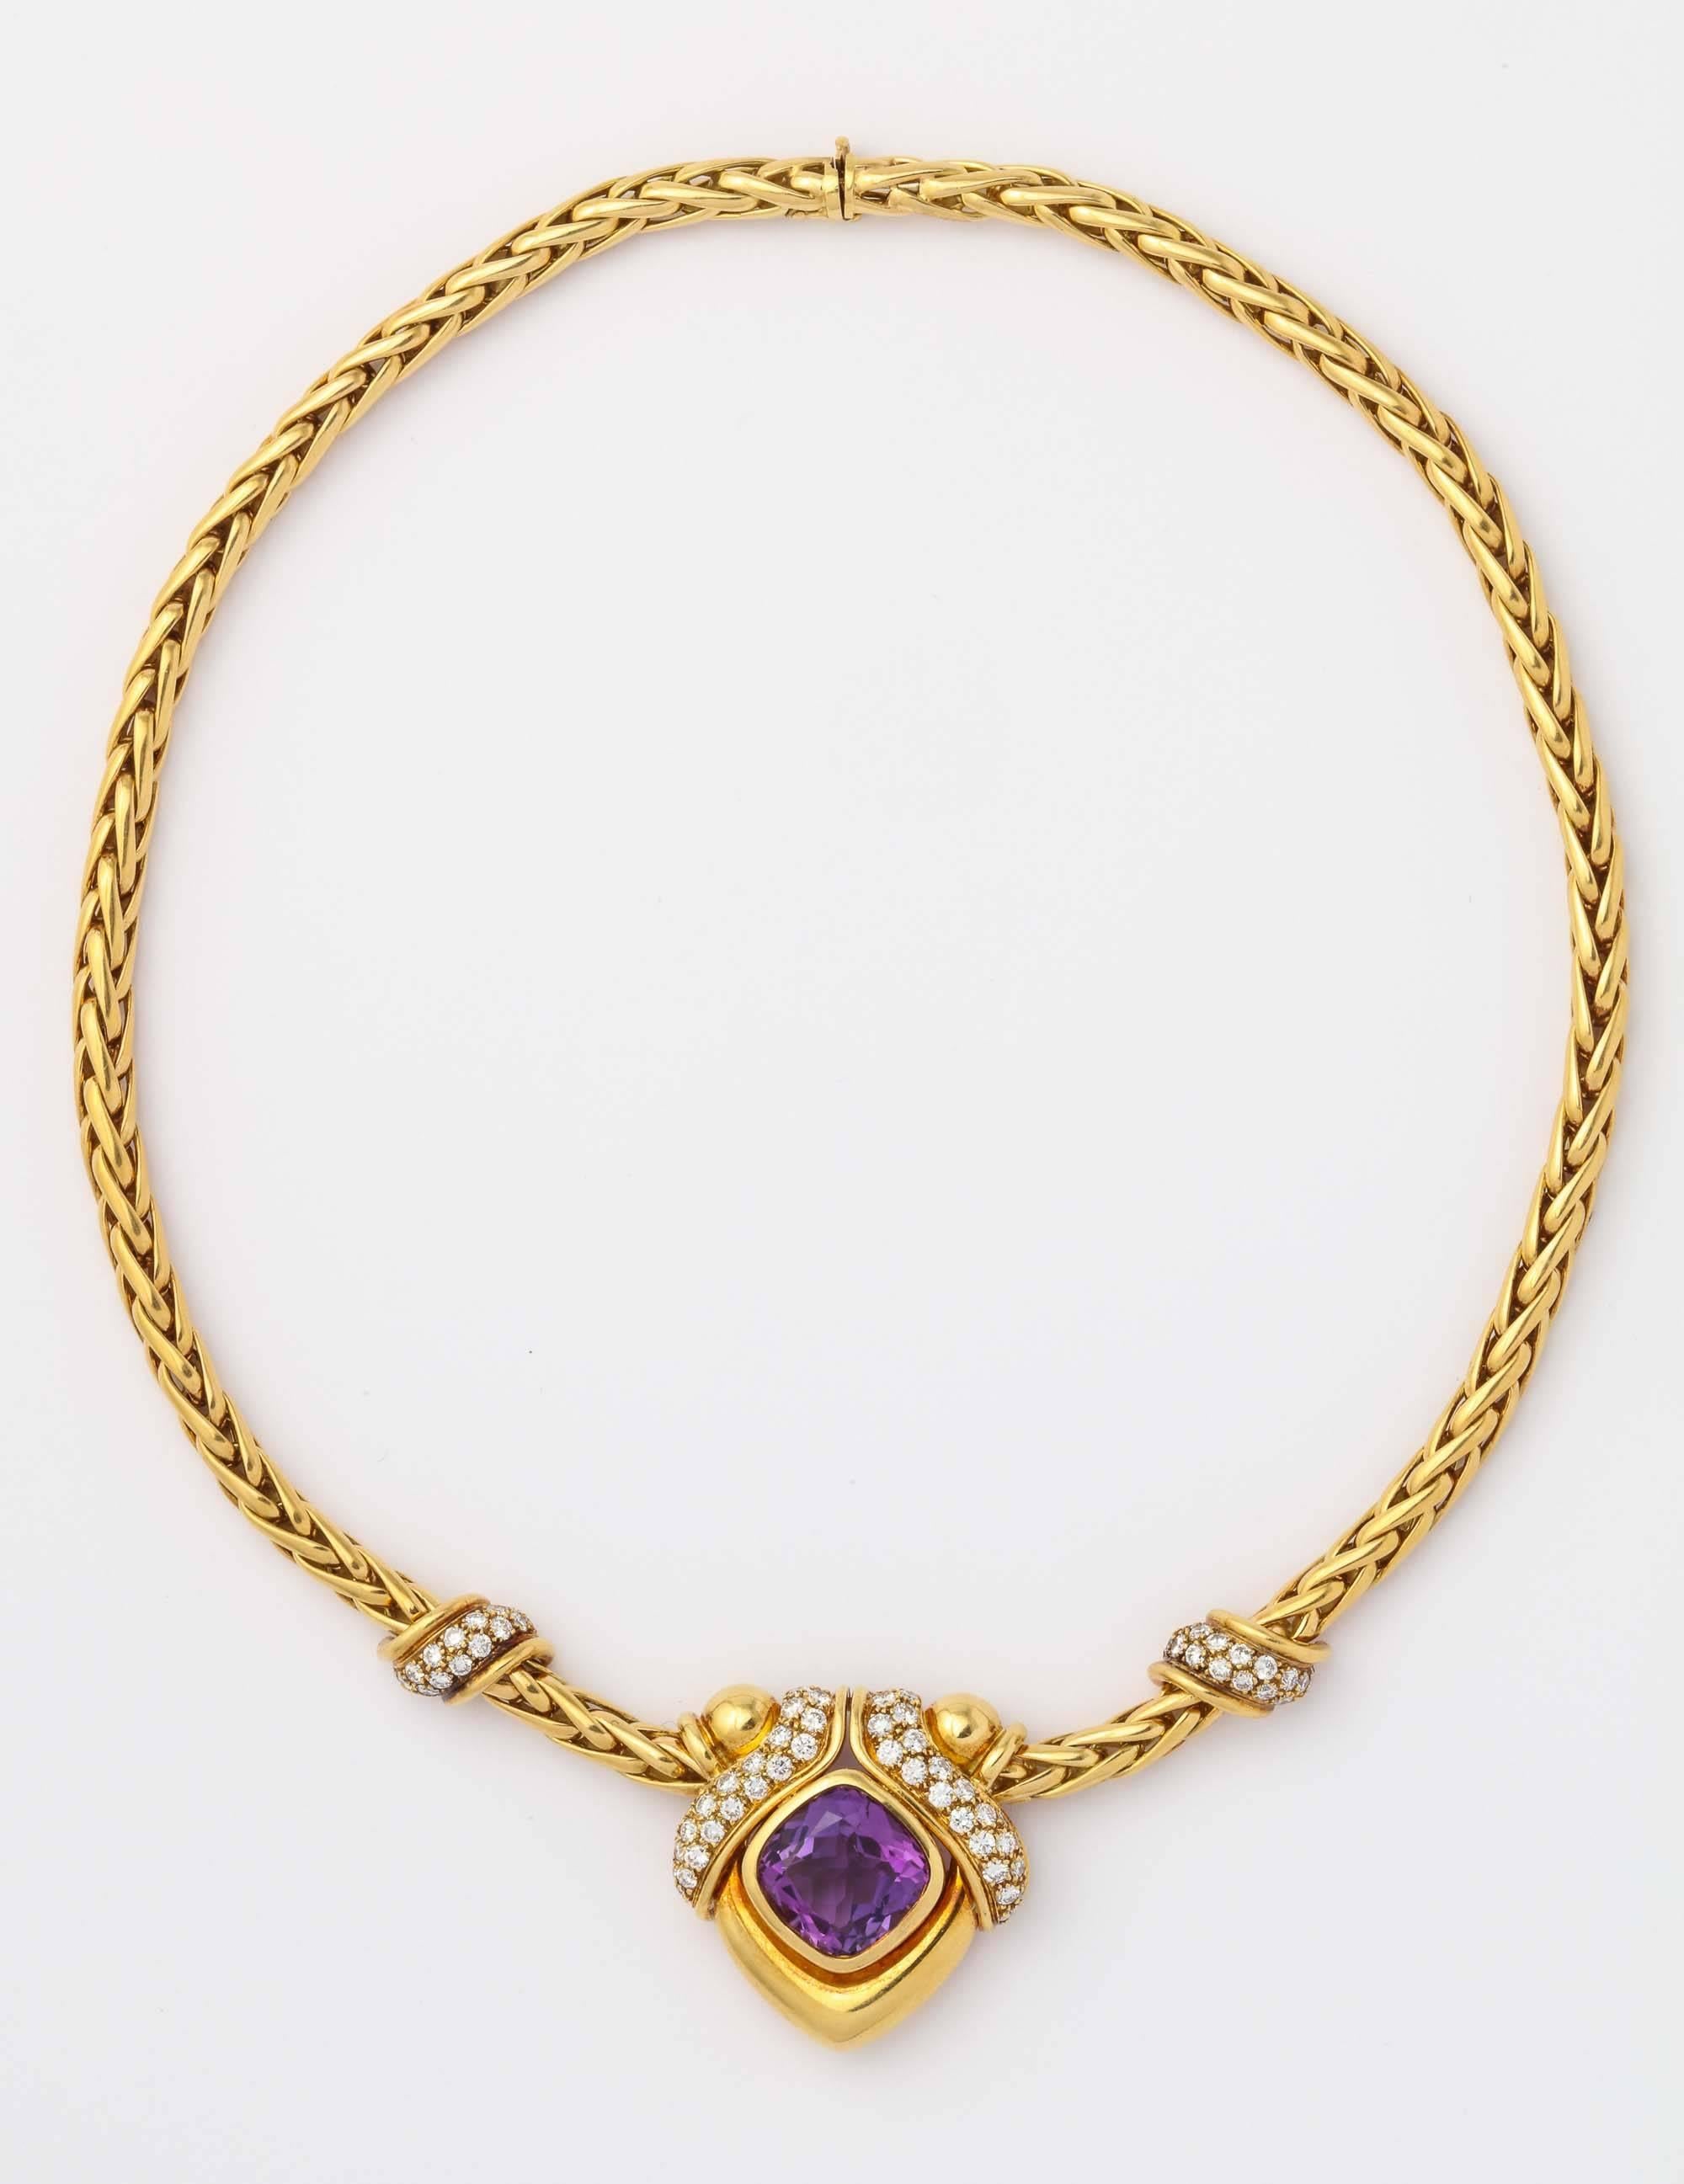 18k handmade rope necklace centering a cushion shaped amethyst approximately 8 carats surrounded by full cut diamonds weighing 1.75 carat